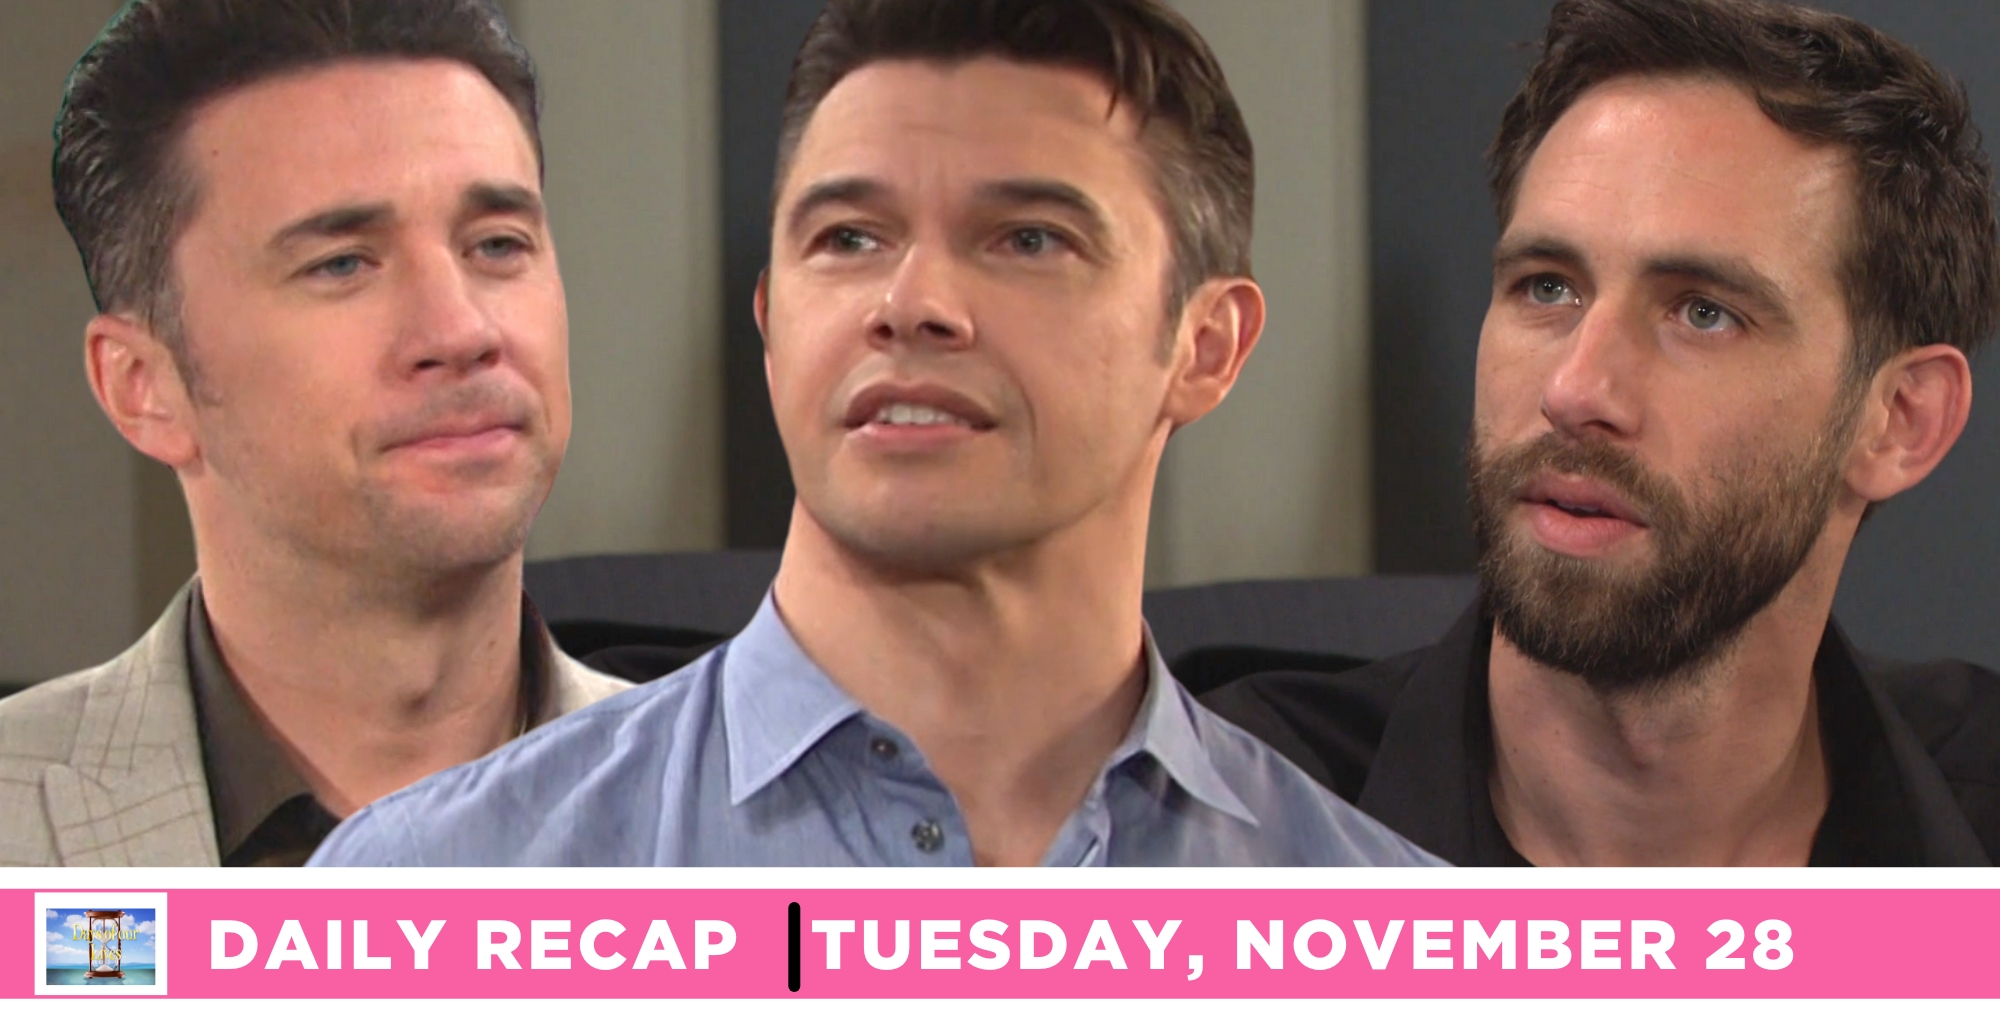 chad dimera cut a deal with xander cook to get rid of everett lynch on days of our lives recap for tuesday, november 28, 2023.